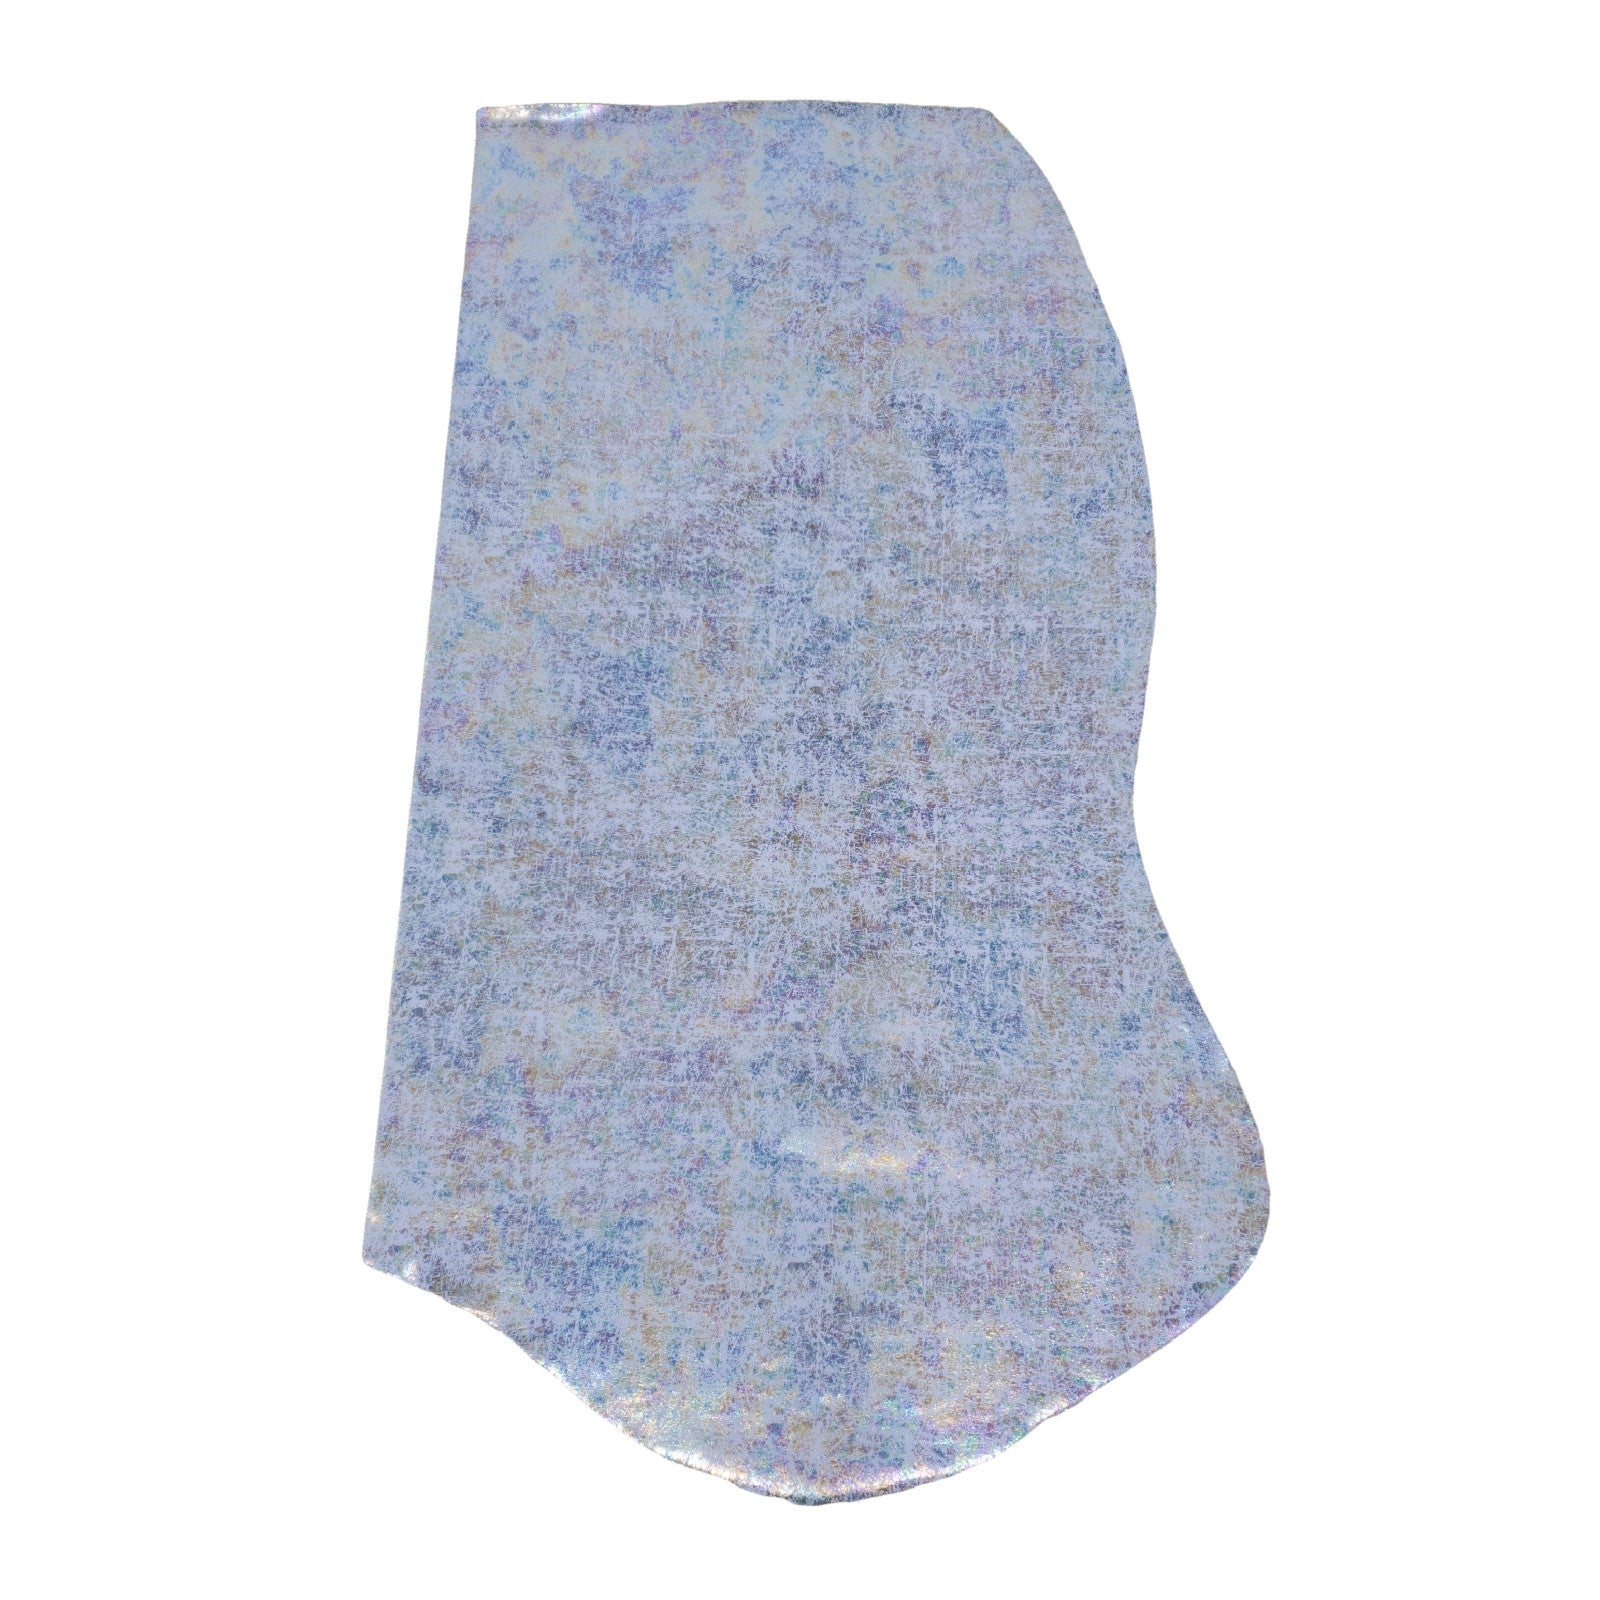 Mermaid Tears Periwinkle 3-4 oz Cowhide Sides & Project Pieces, 9-10 SQ FT | The Leather Guy